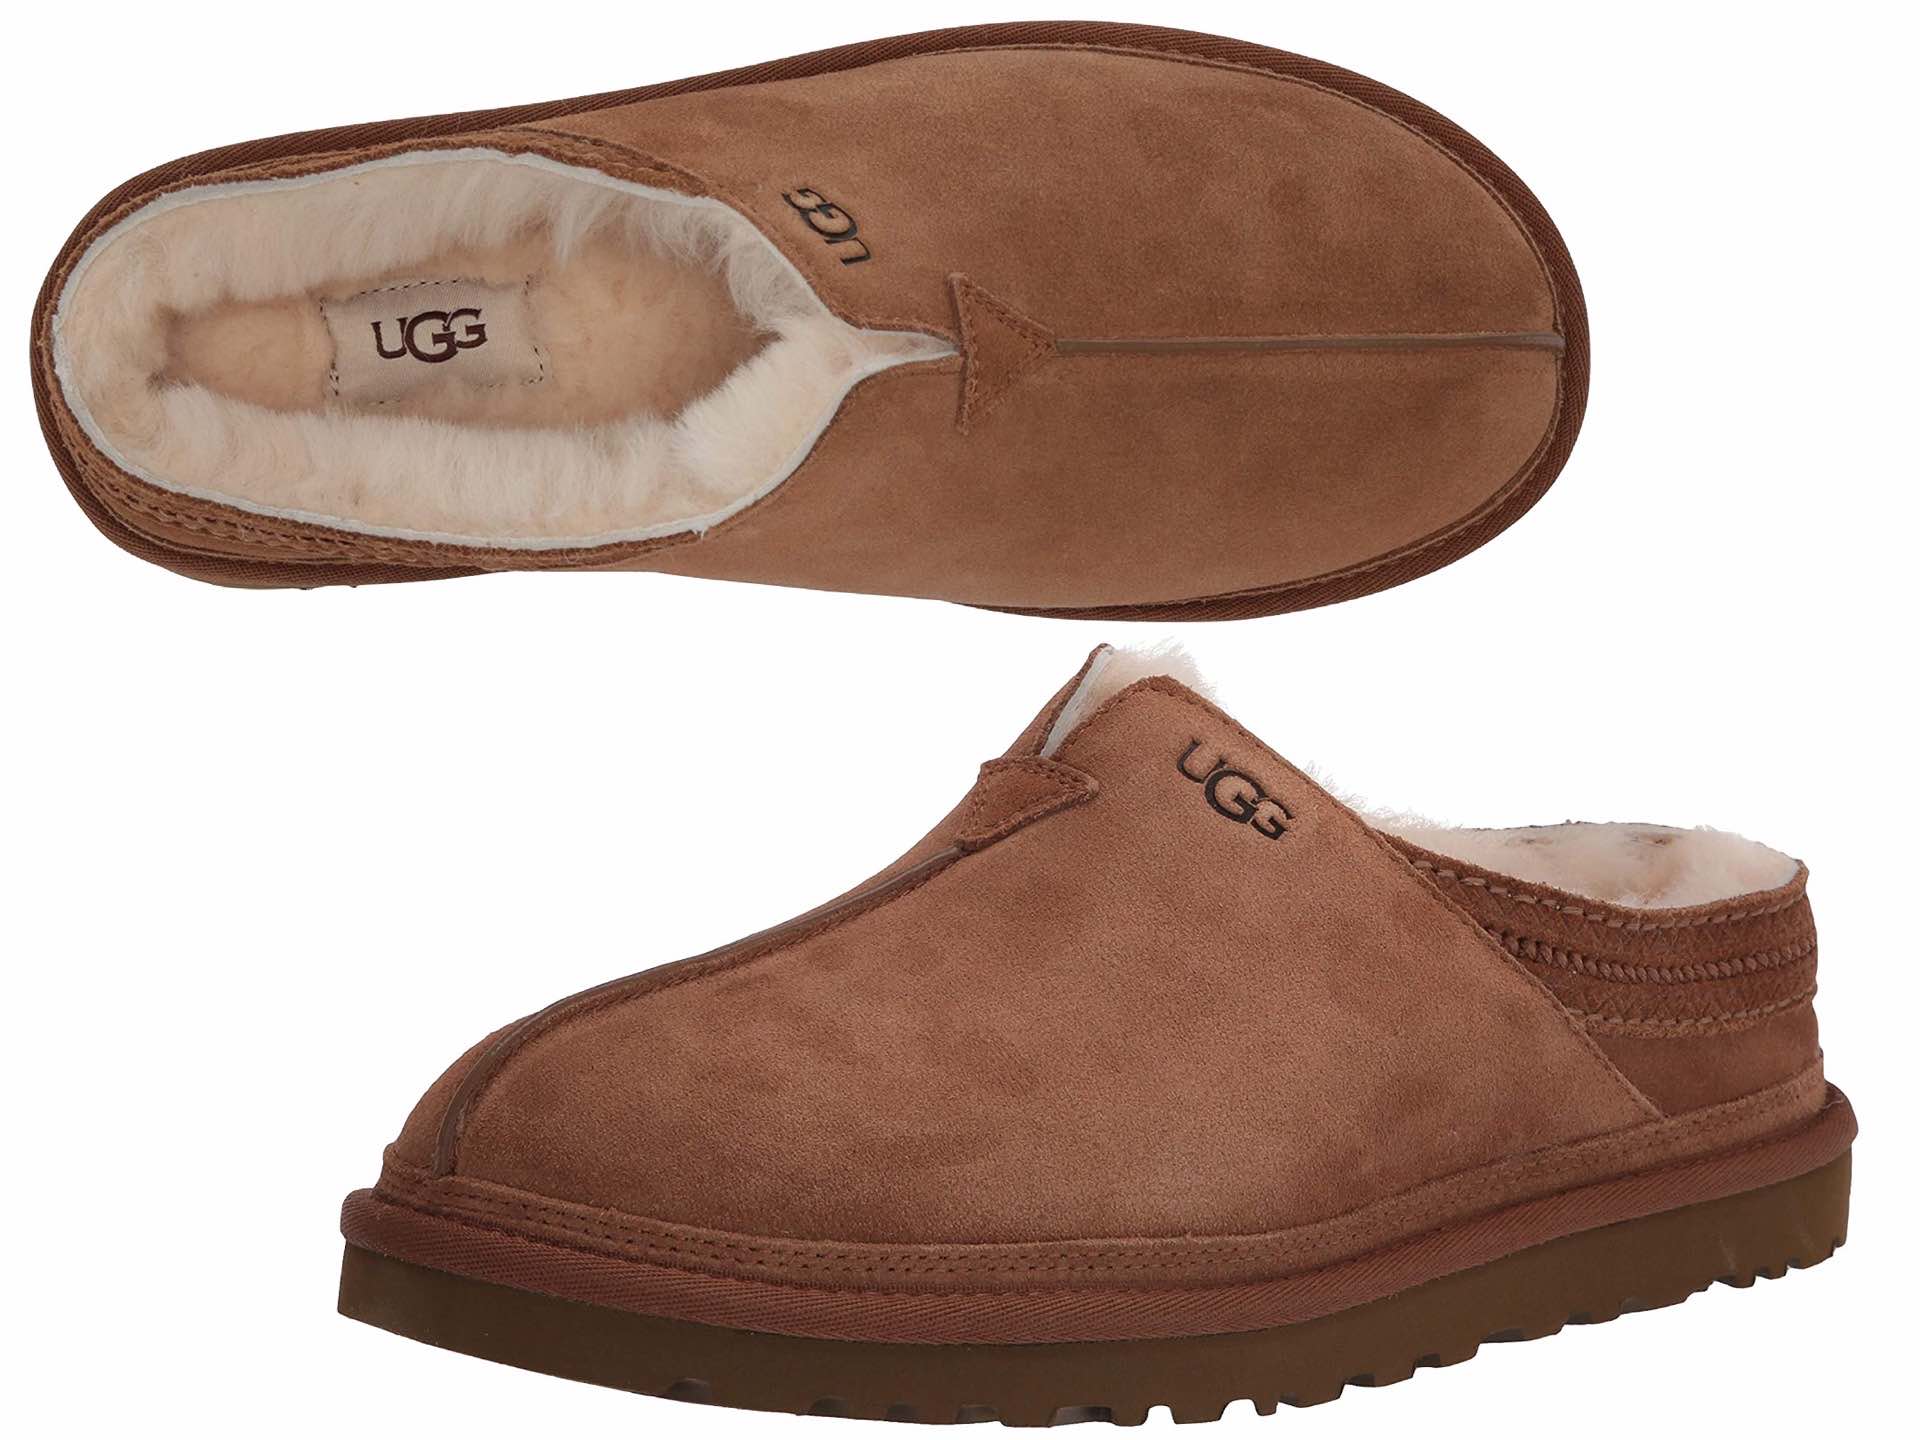 ugg-neuman-mens-suede-slippers